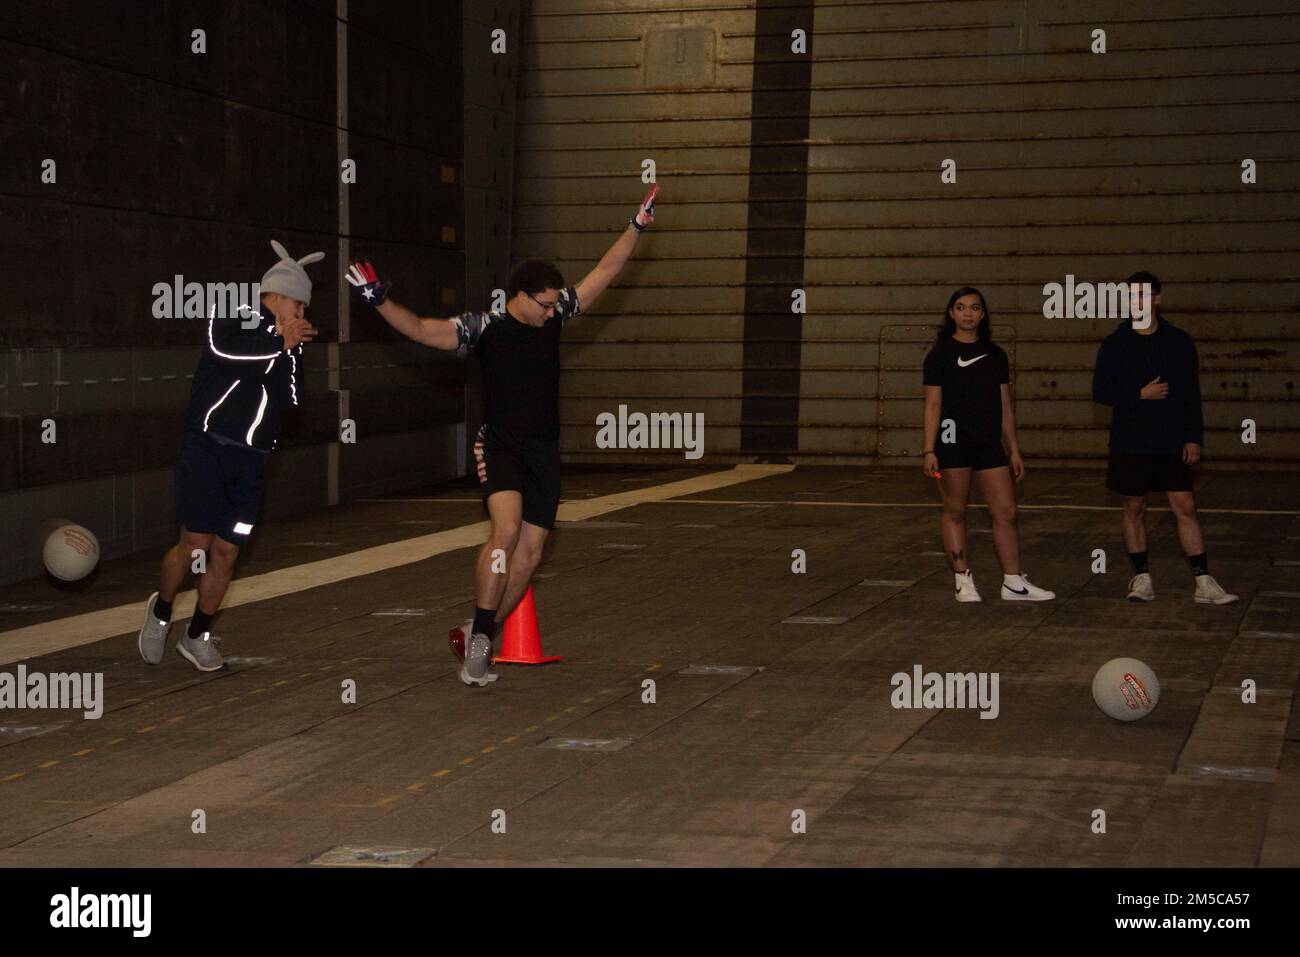 220228-N-XB010-1020 EAST CHINA SEA (Feb. 28, 2022) Sailors assigned to USS New Orleans (LPD 18) compete in a Morale, Wellness and Recreation sponsored dodgeball tournament in the ship’s well deck. New Orleans, part of the America Amphibious Ready Group, along with the 31st Marine Expeditionary Unit, is operating in the U.S. 7th Fleet area of responsibility to enhance interoperability with allies and partners and serve as a ready response force to defend peace and stability in the Indo-Pacific region. Stock Photo